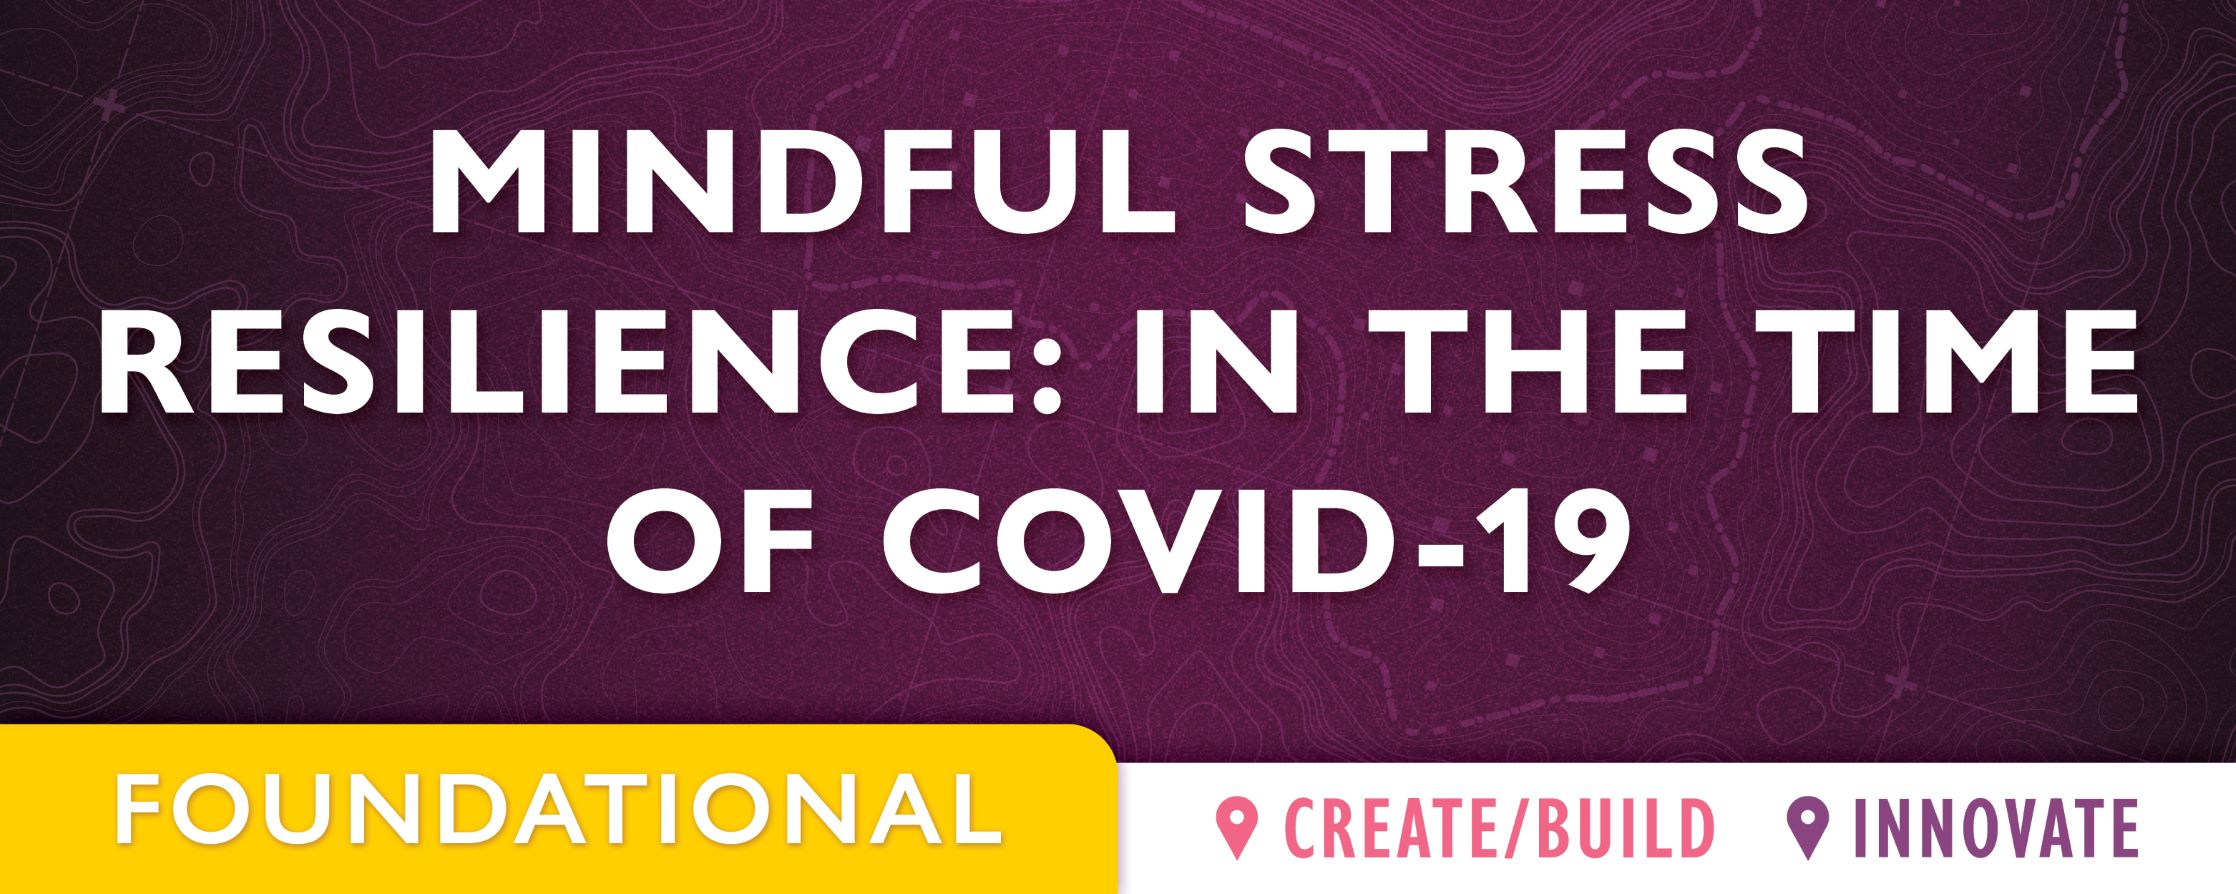 purple background with text: Mindful Stress Resilience: In the Time of COVID-19 